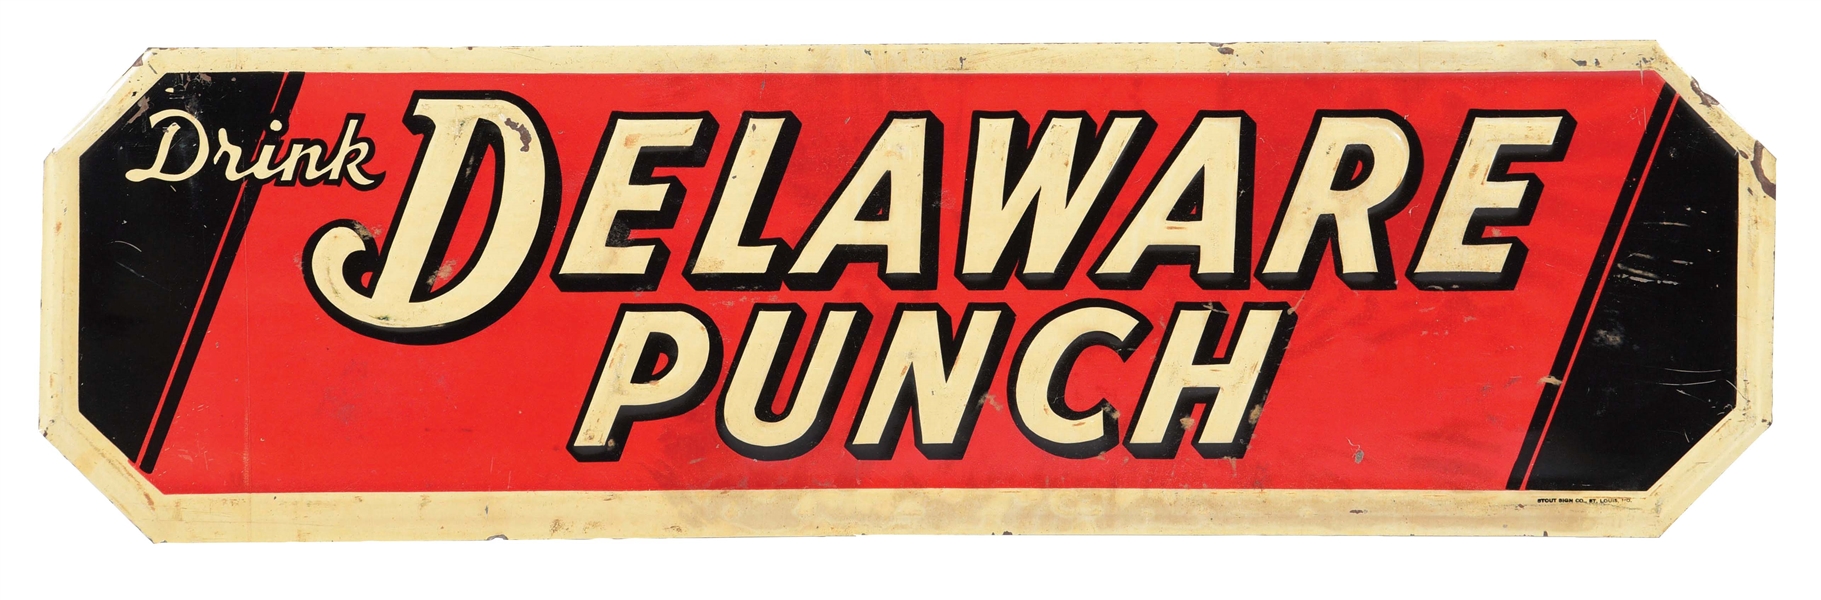 "DRINK DELAWARE PUNCH" EMBOSSED TIN SIGN.